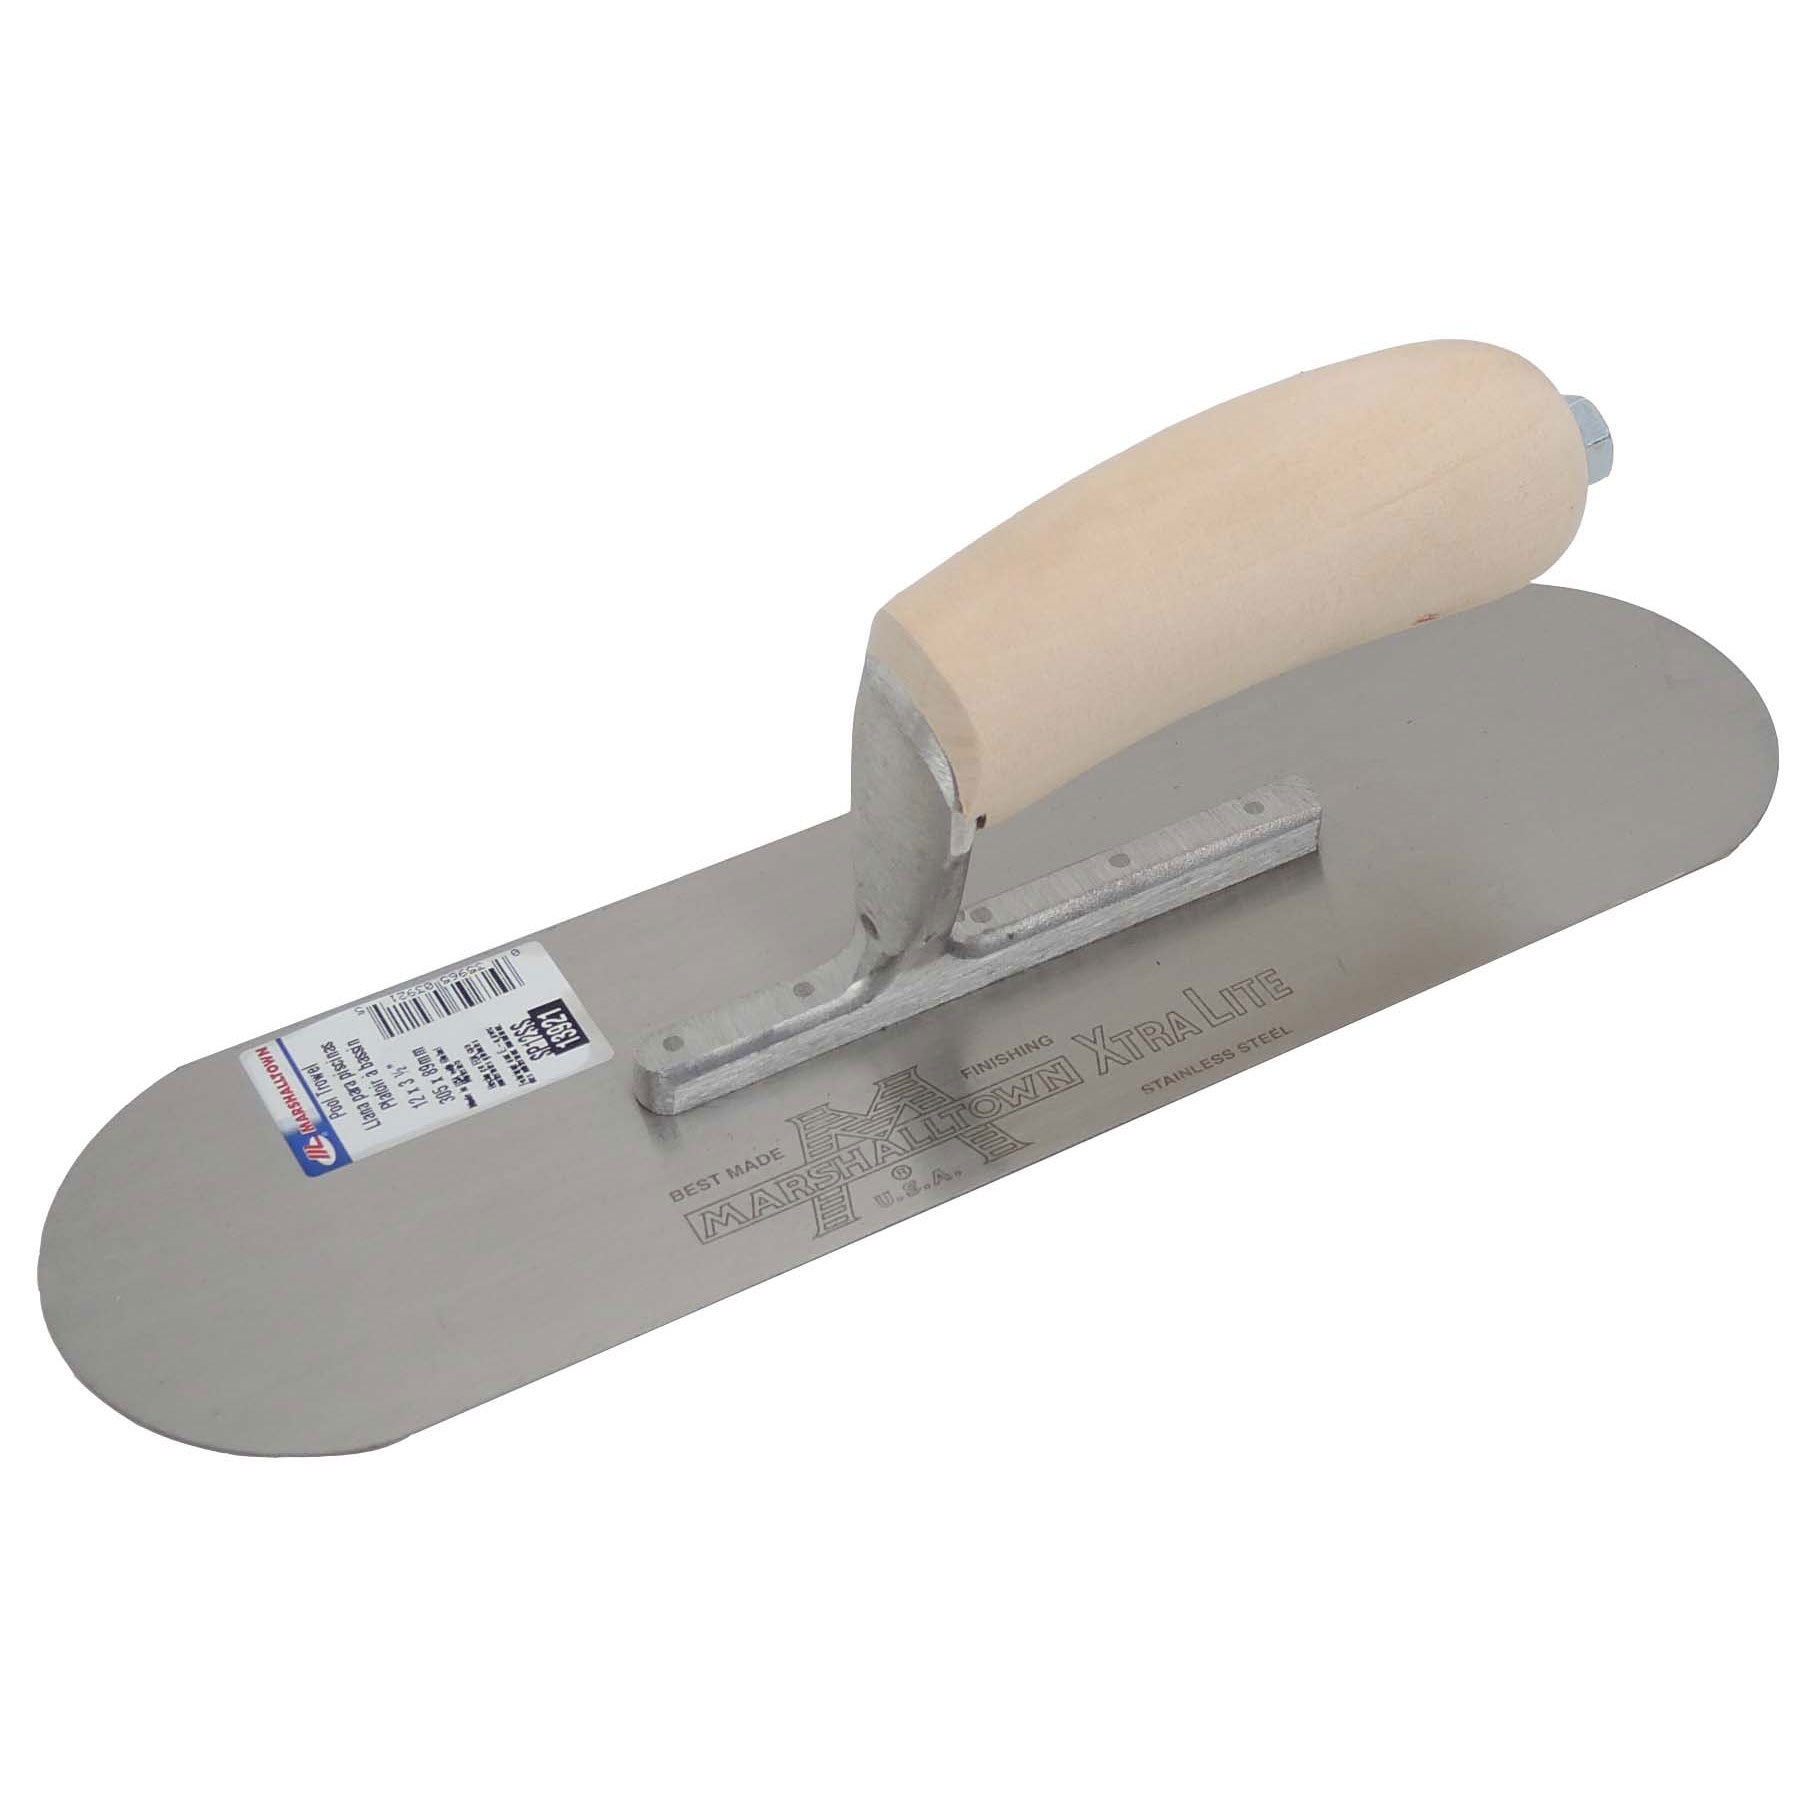 Marshalltown SP12SS 12in x 3-1/2in Stainless Steel Pool Trowel with Curved Wood Handle SP12SS